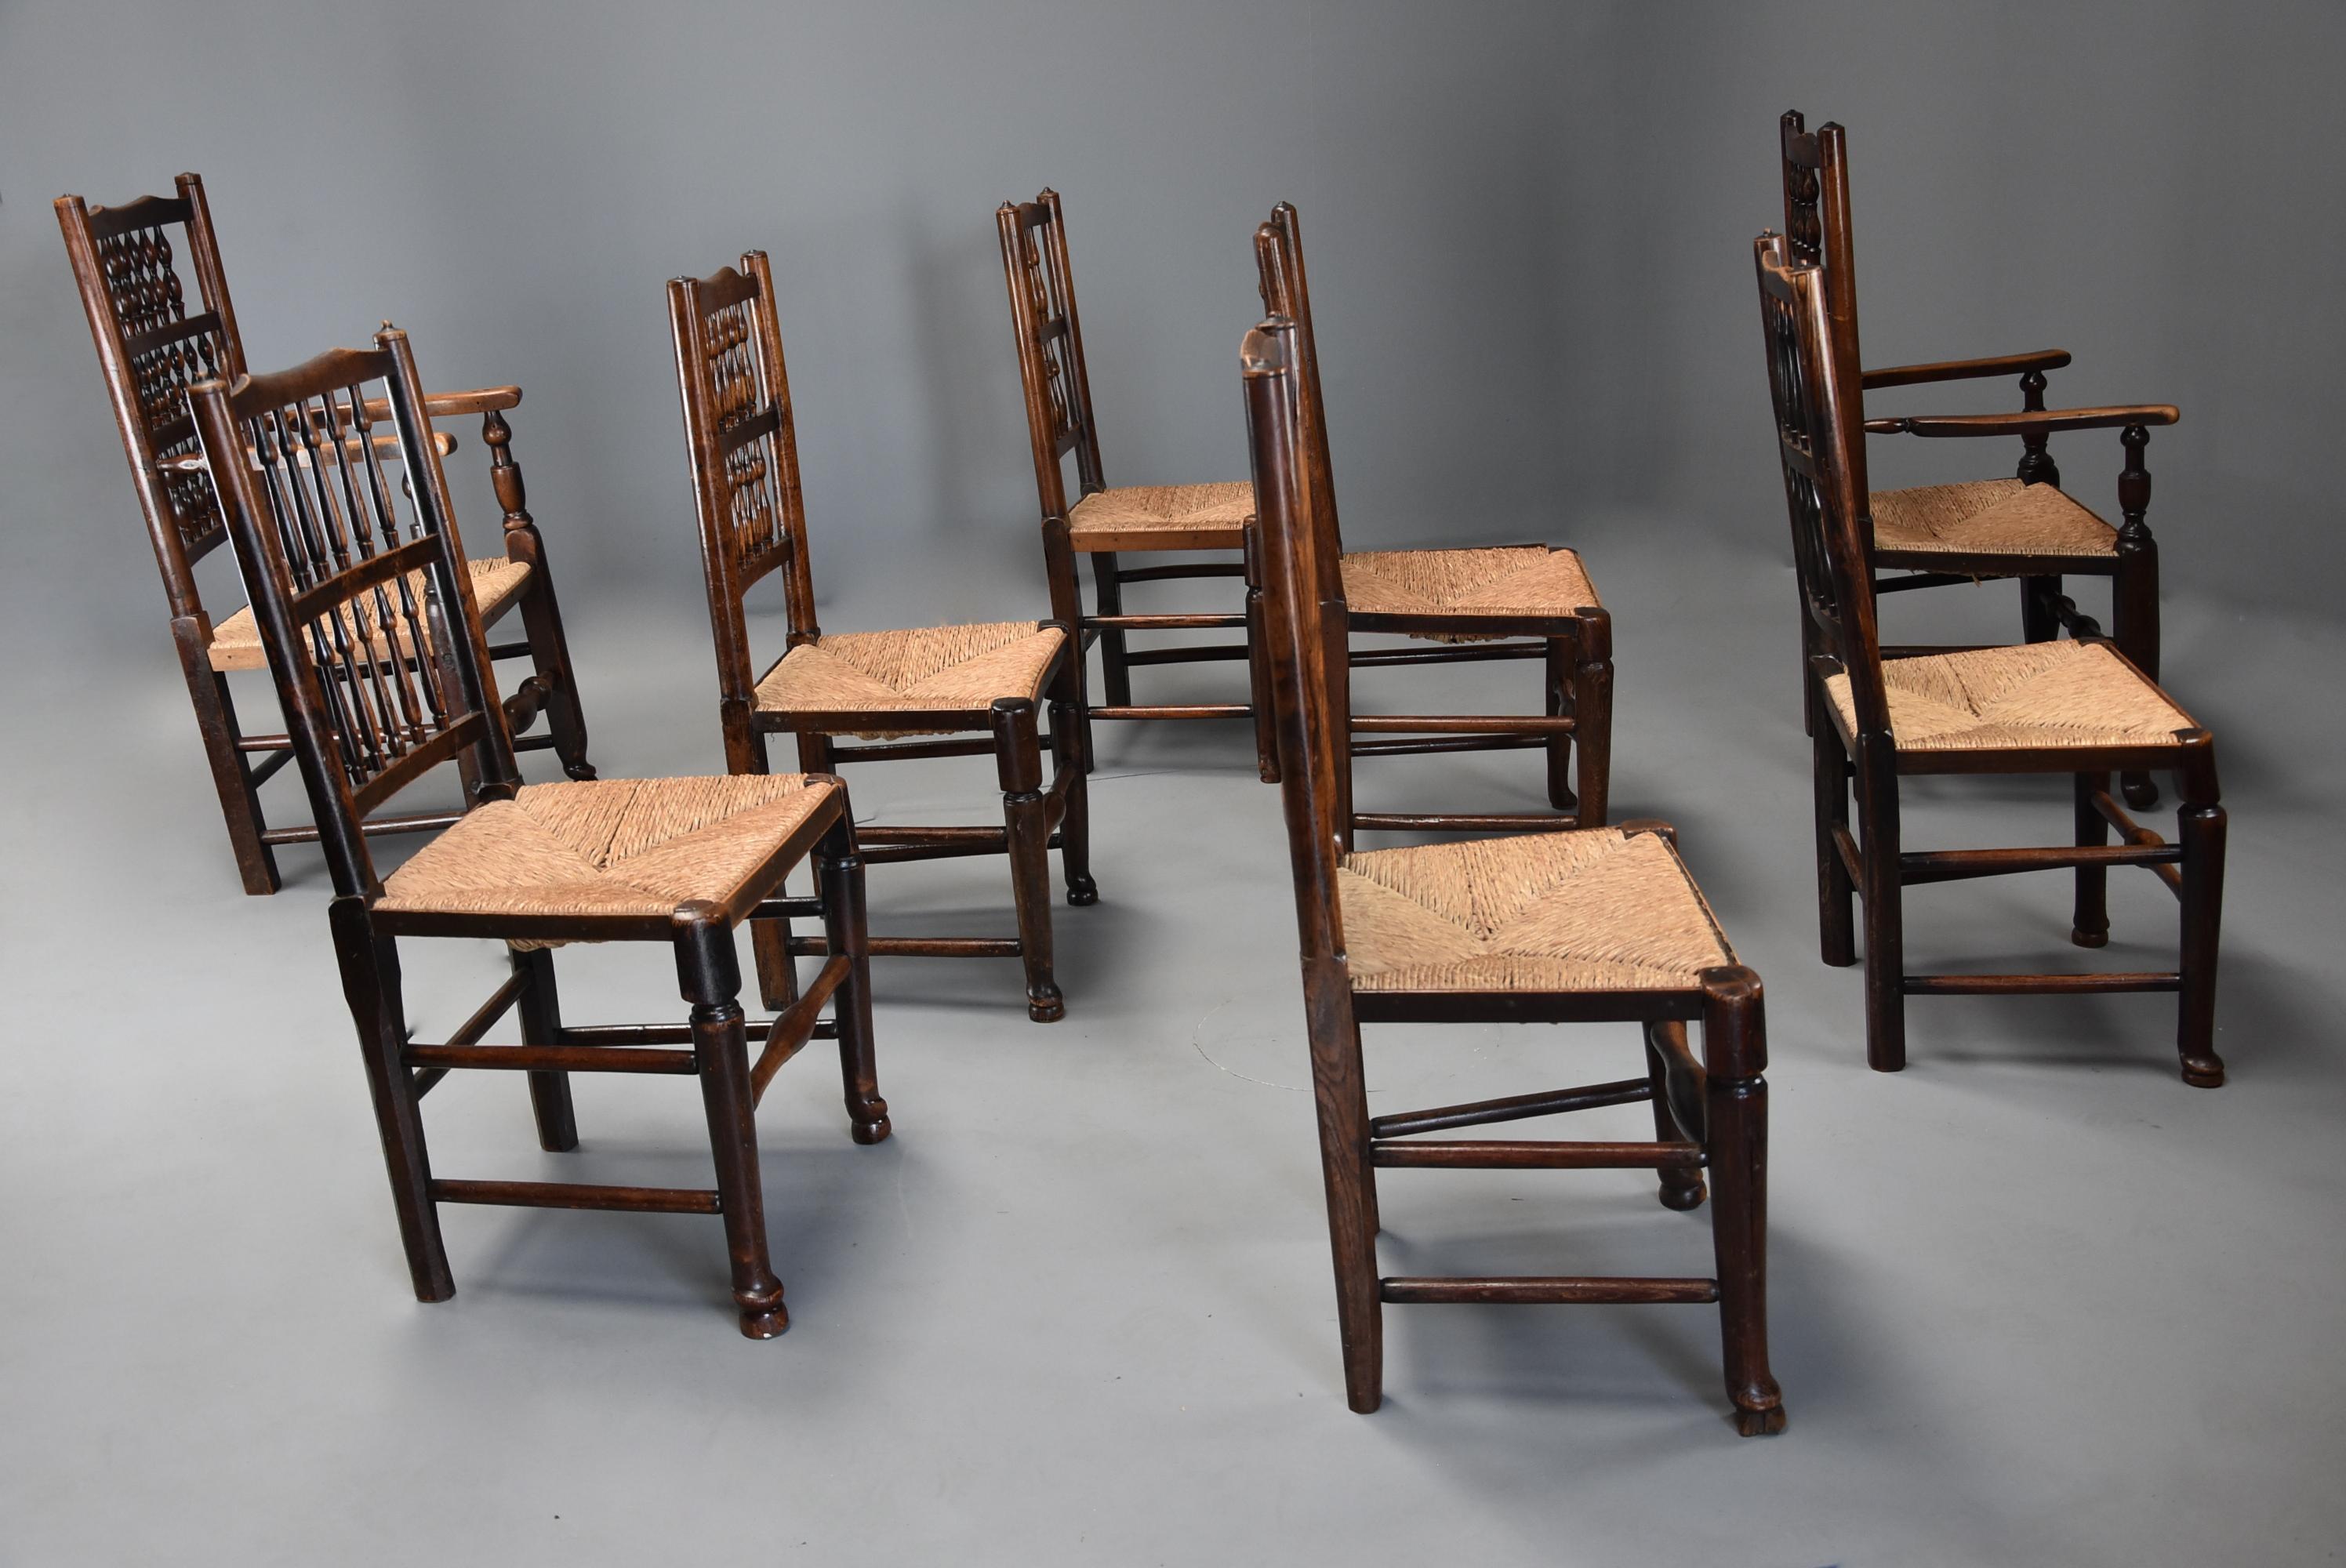 Matched Set of Eight Mid-19th Century Ash Spindle Back Chairs of Superb Patina For Sale 5